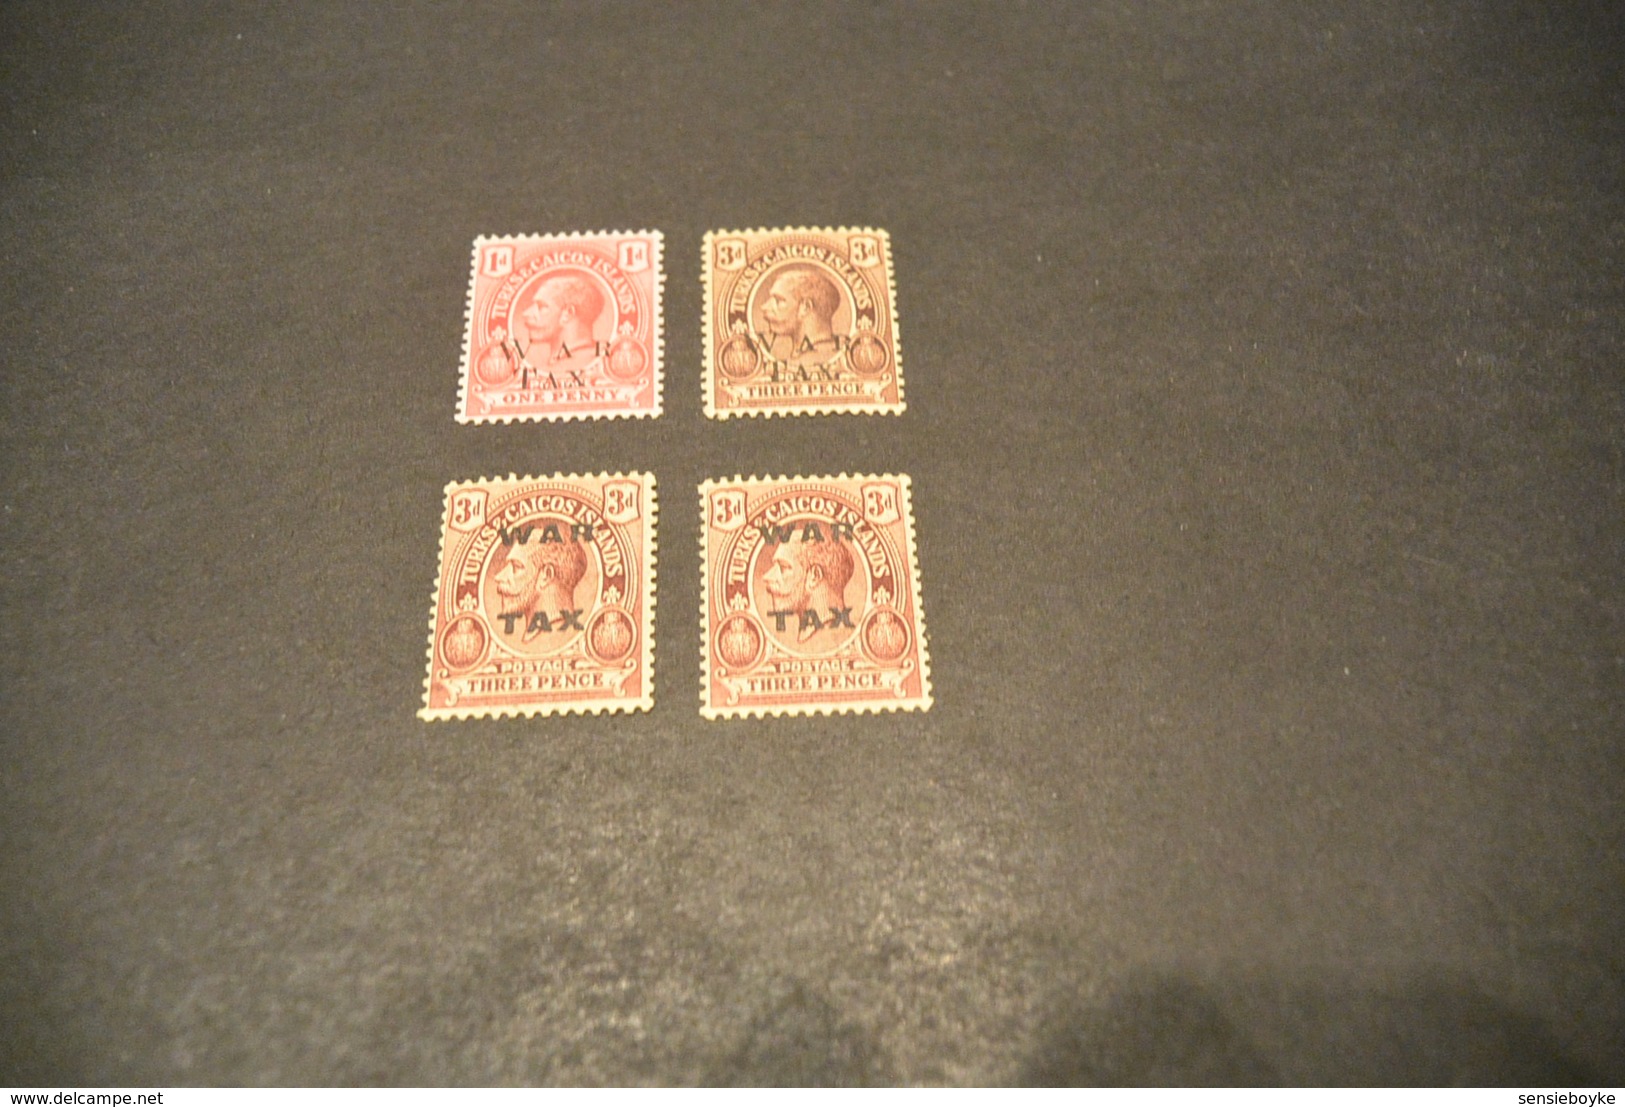 K15906 - Stamps Mint Hinged And MNH Turks & Caicos - War Tax - Turks & Caicos (I. Turques Et Caïques)